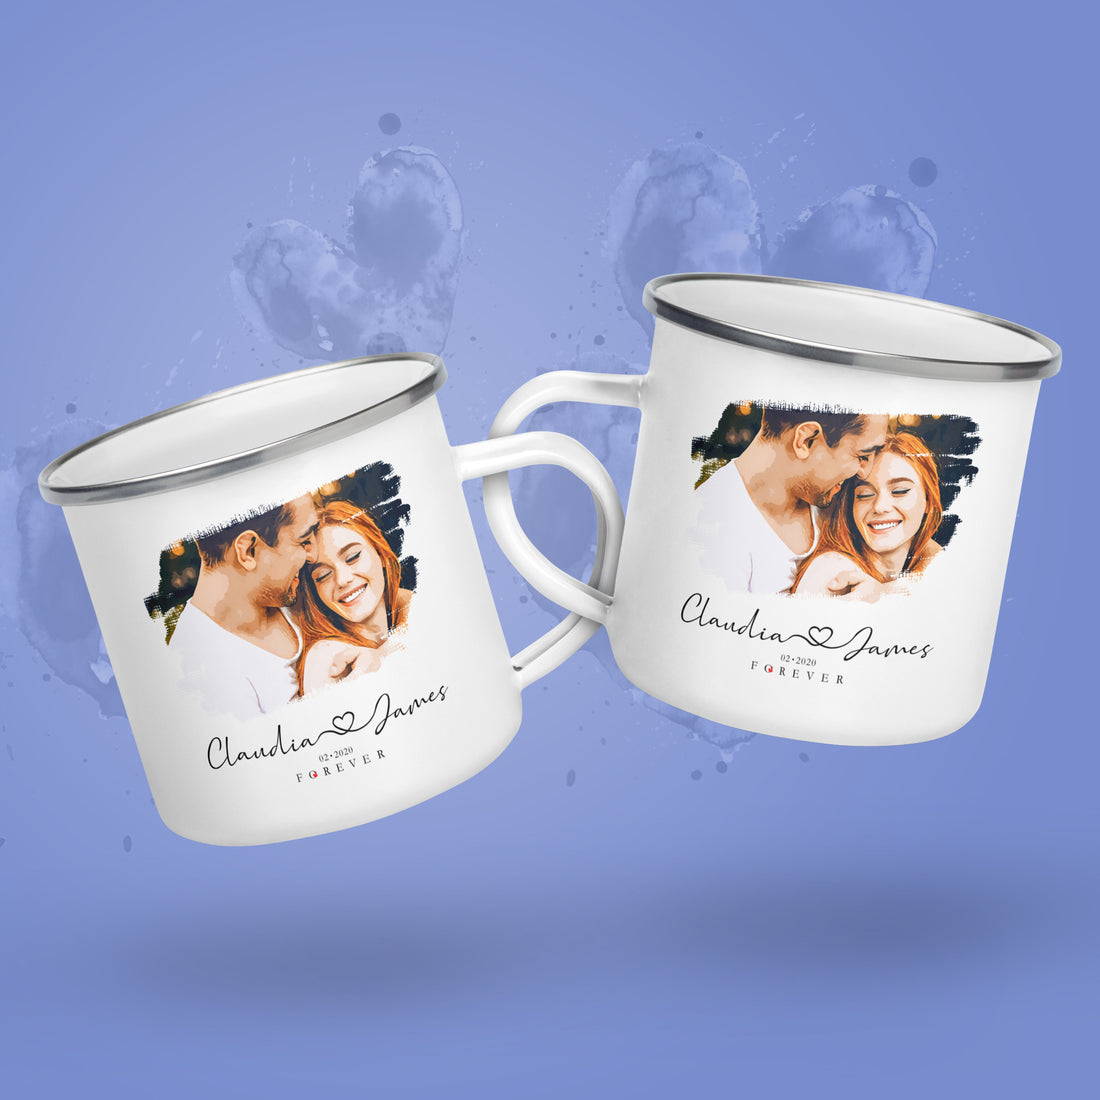 Discover our Collection of Personalized Mugs